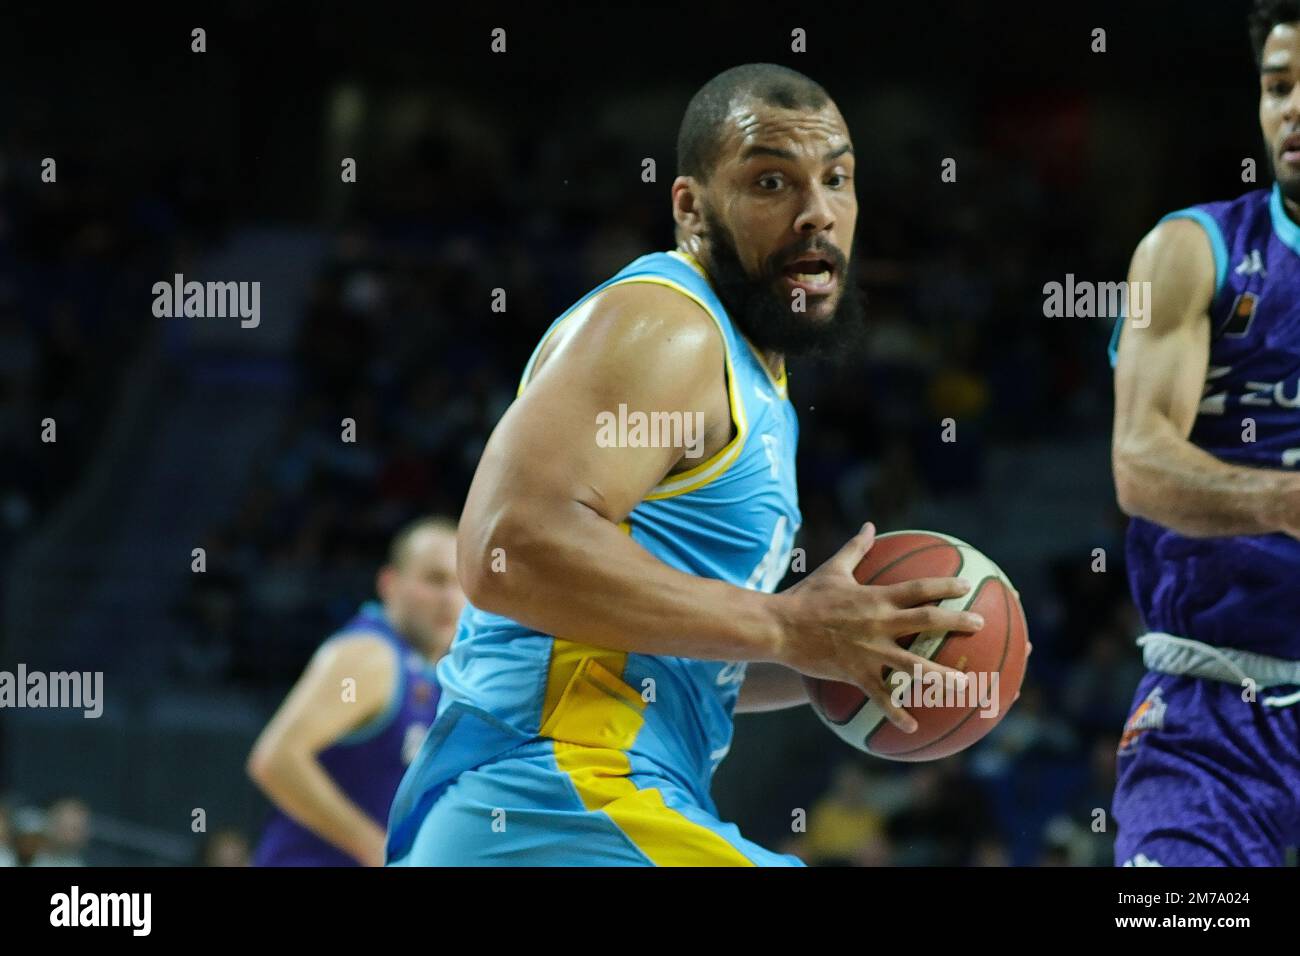 Madrid, Spain. 08th Jan, 2023. Player Kevin Larsen of Movistar Estudiantes  seen in action during the Spanish league, Liga LEB Oro, basketball match  between Movistar Estudiantes and Zunder Palencia at Wizink Center